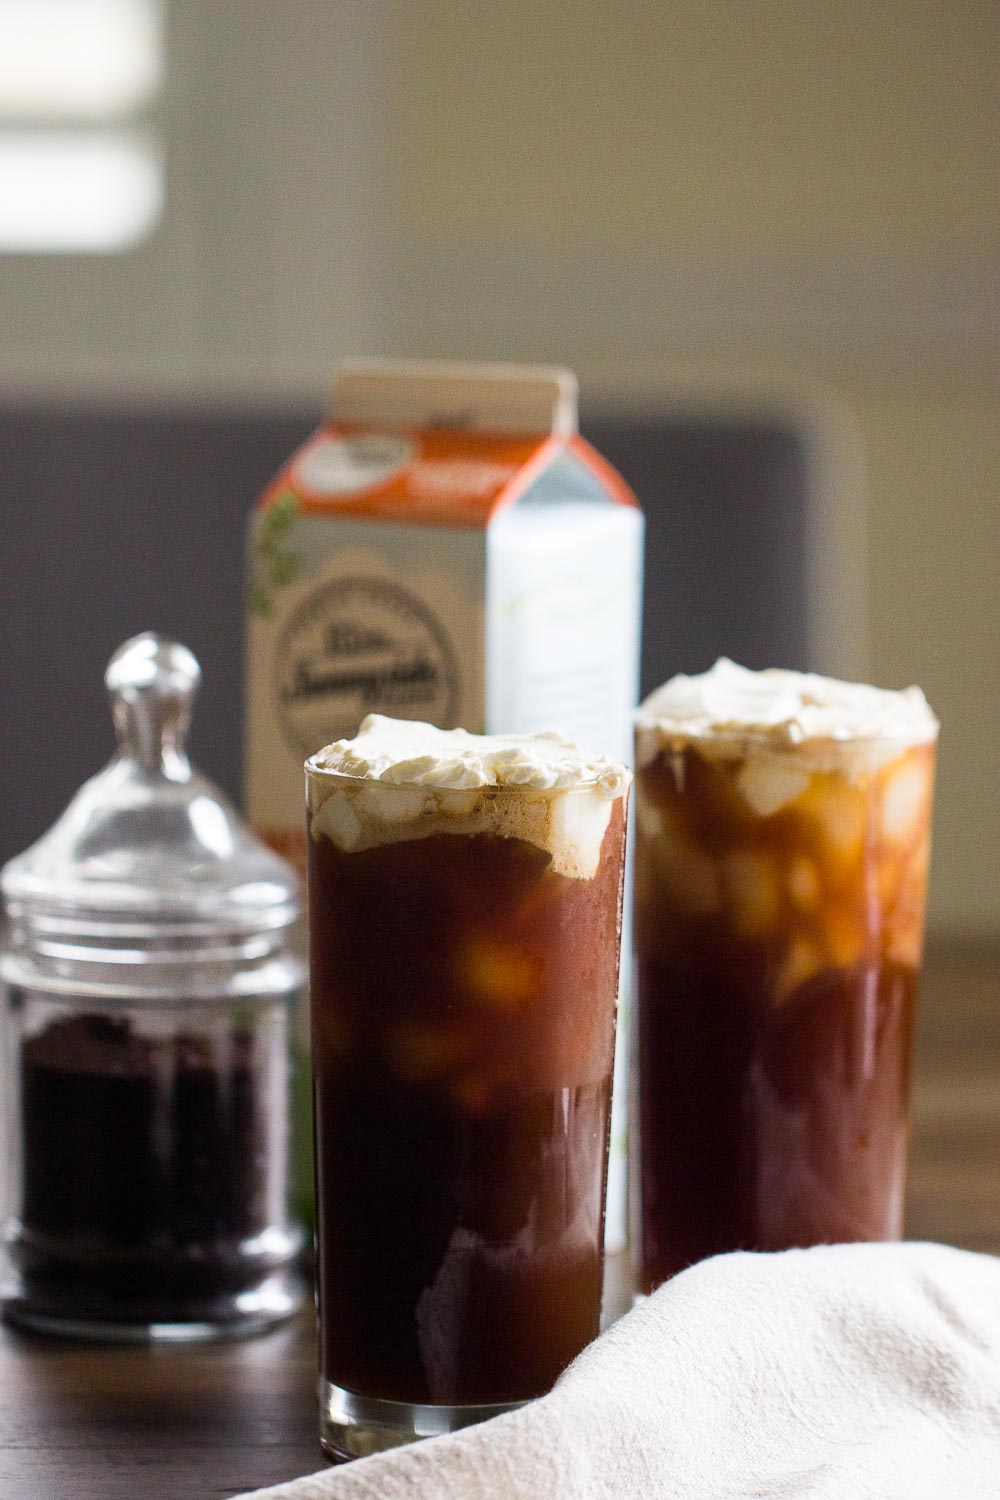 Cold-brew and sweet cream make a perfect duet any time of the day. This Starbucks vanilla sweet cream cold brew recipe is slightly sweet and totally refreshing! Perfect for breakfast with a side of croissant waffles or for tea time with pukis cake.